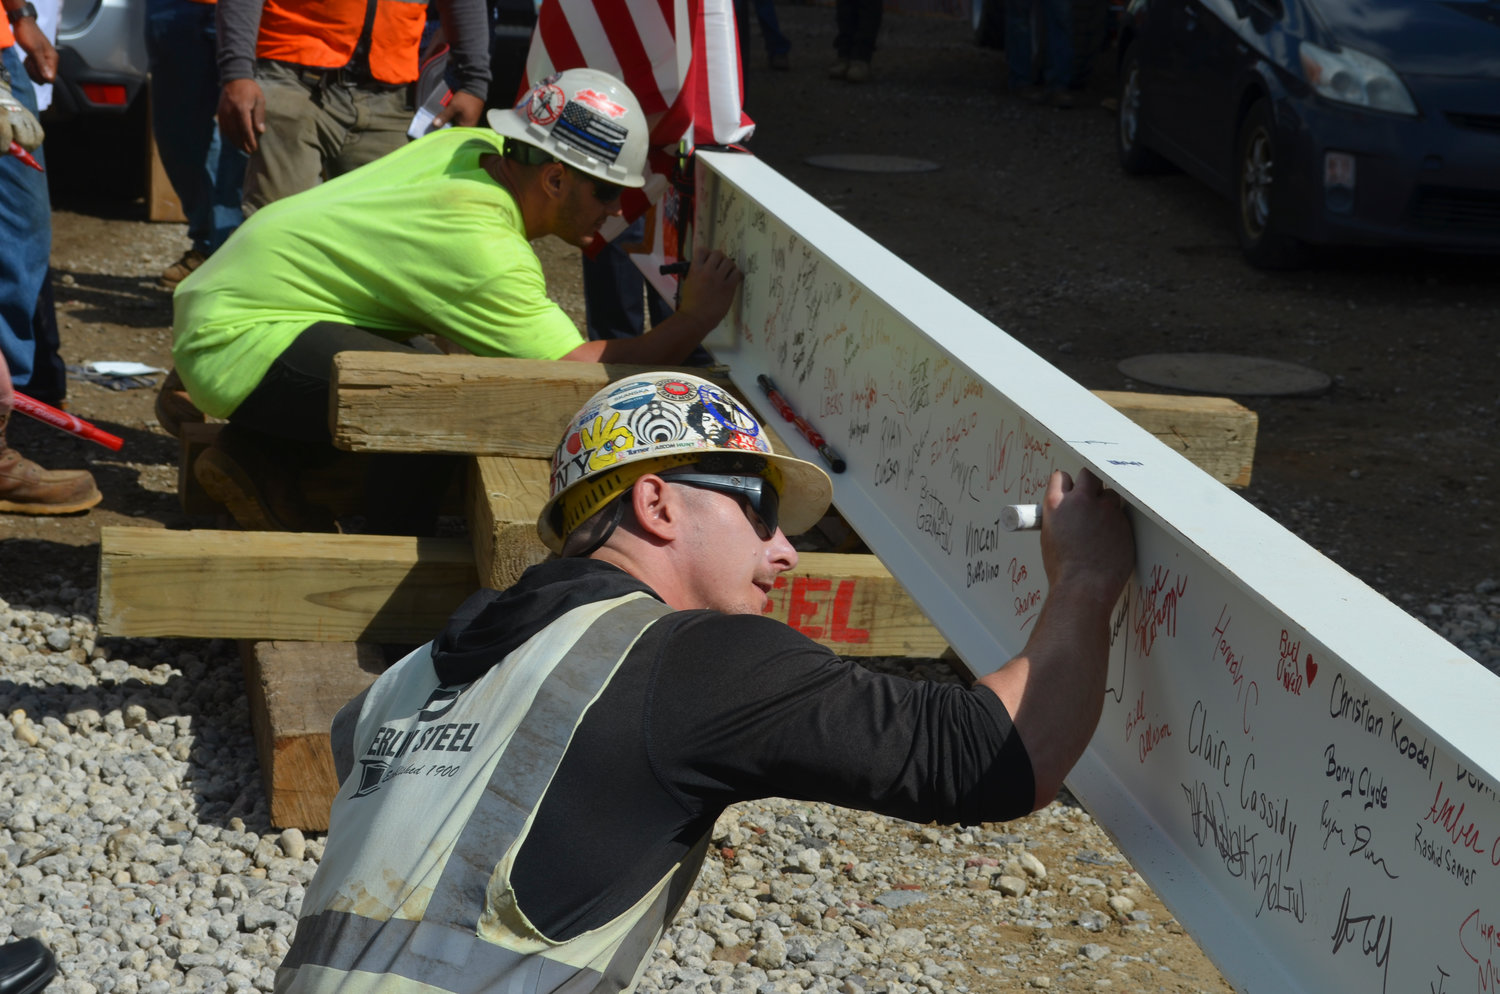 Construction workers Sal Gustella and Curran Digney sign their names onto the final beam steel beam of the J Wing Patient Pavilion as part of its topping out ceremony last week at Mount Sinai South Nassau in Oceanside. The pavilion will open in 2024.